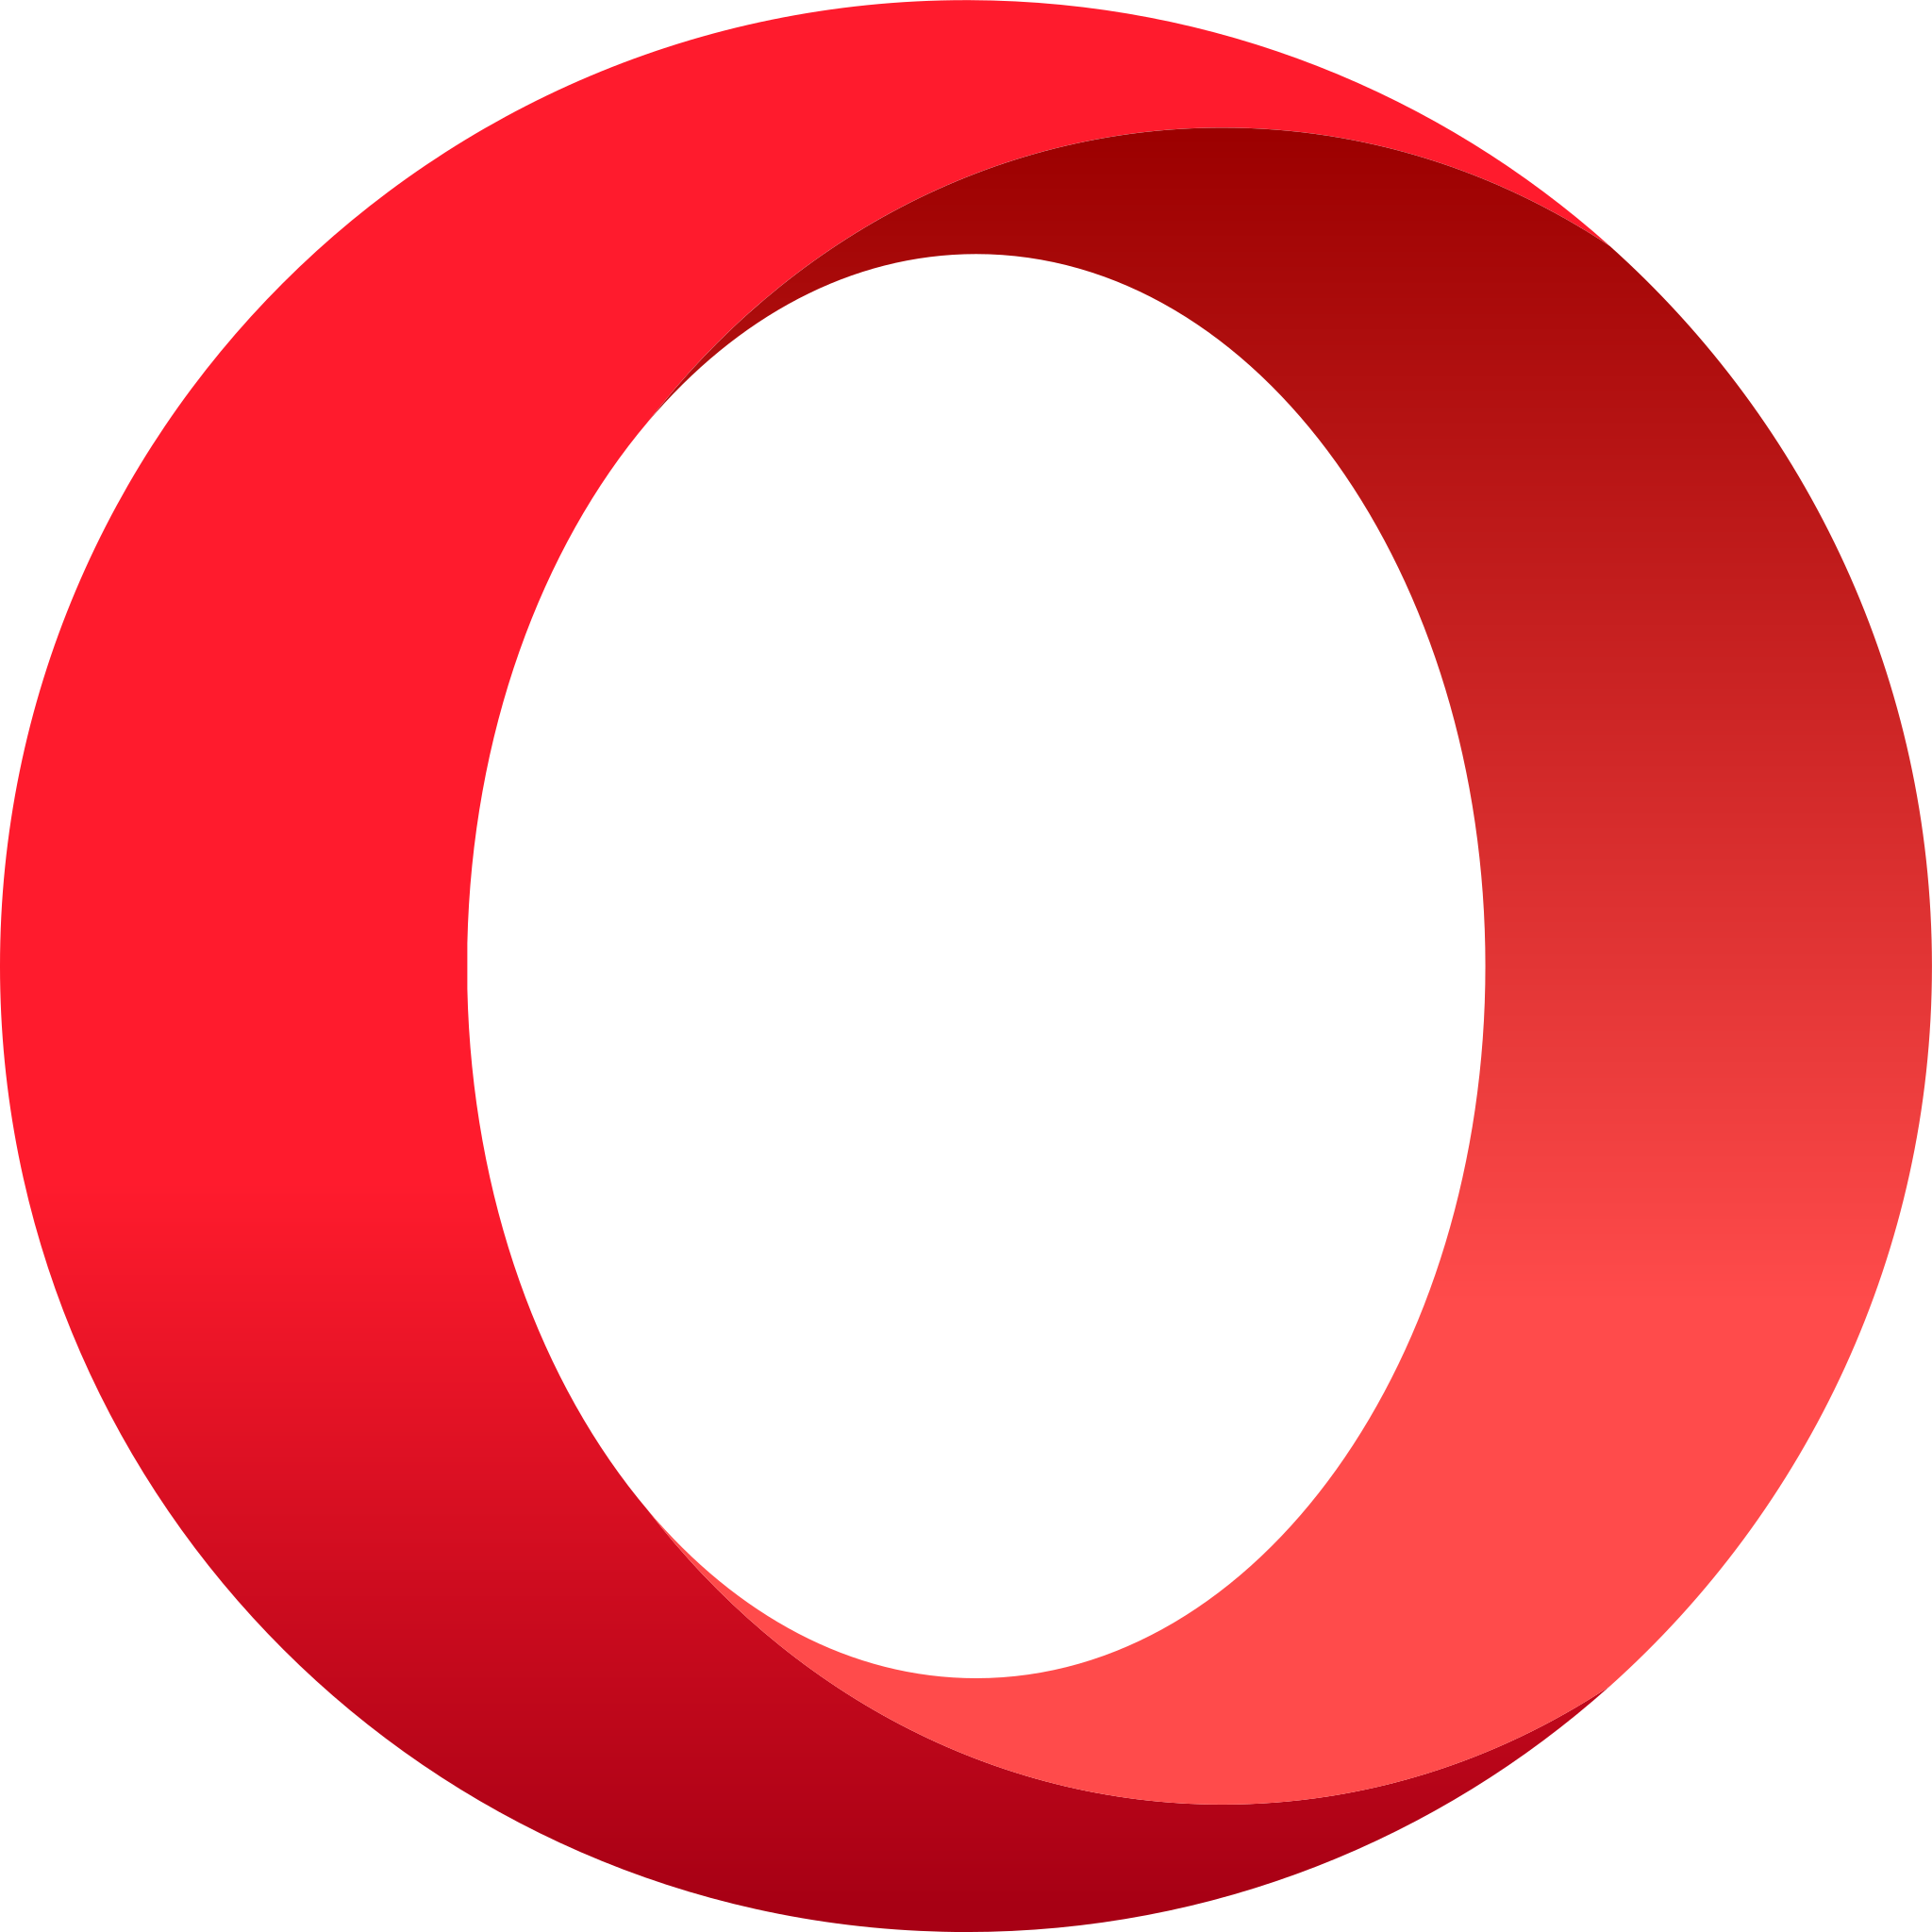 Opera_2015_icon.svg.png